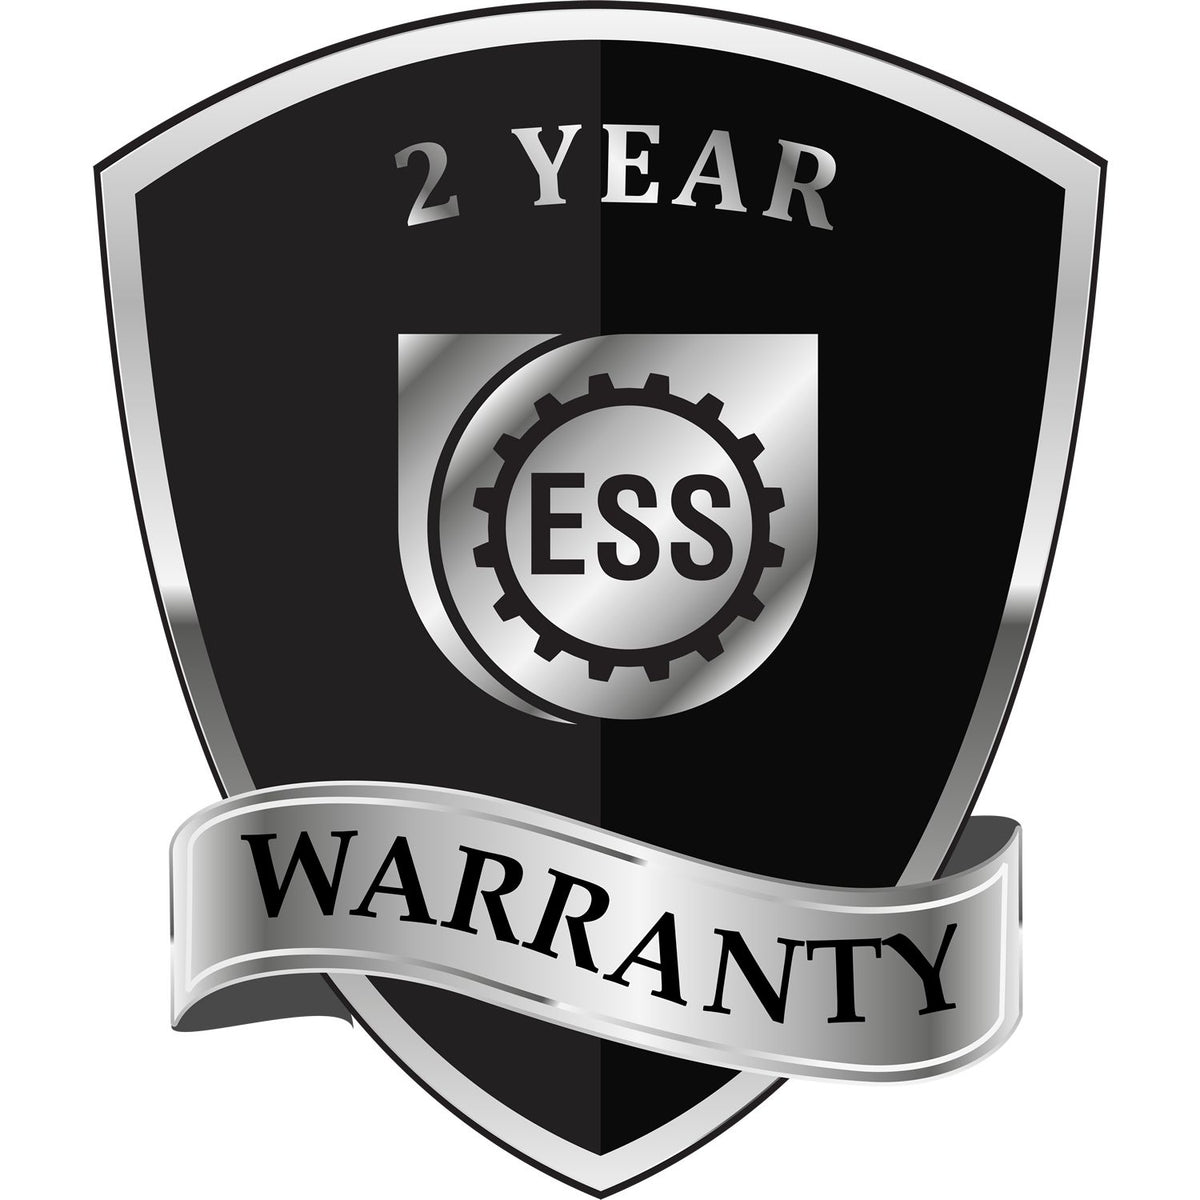 A badge or emblem showing a warranty icon for the Long Reach Florida Land Surveyor Seal